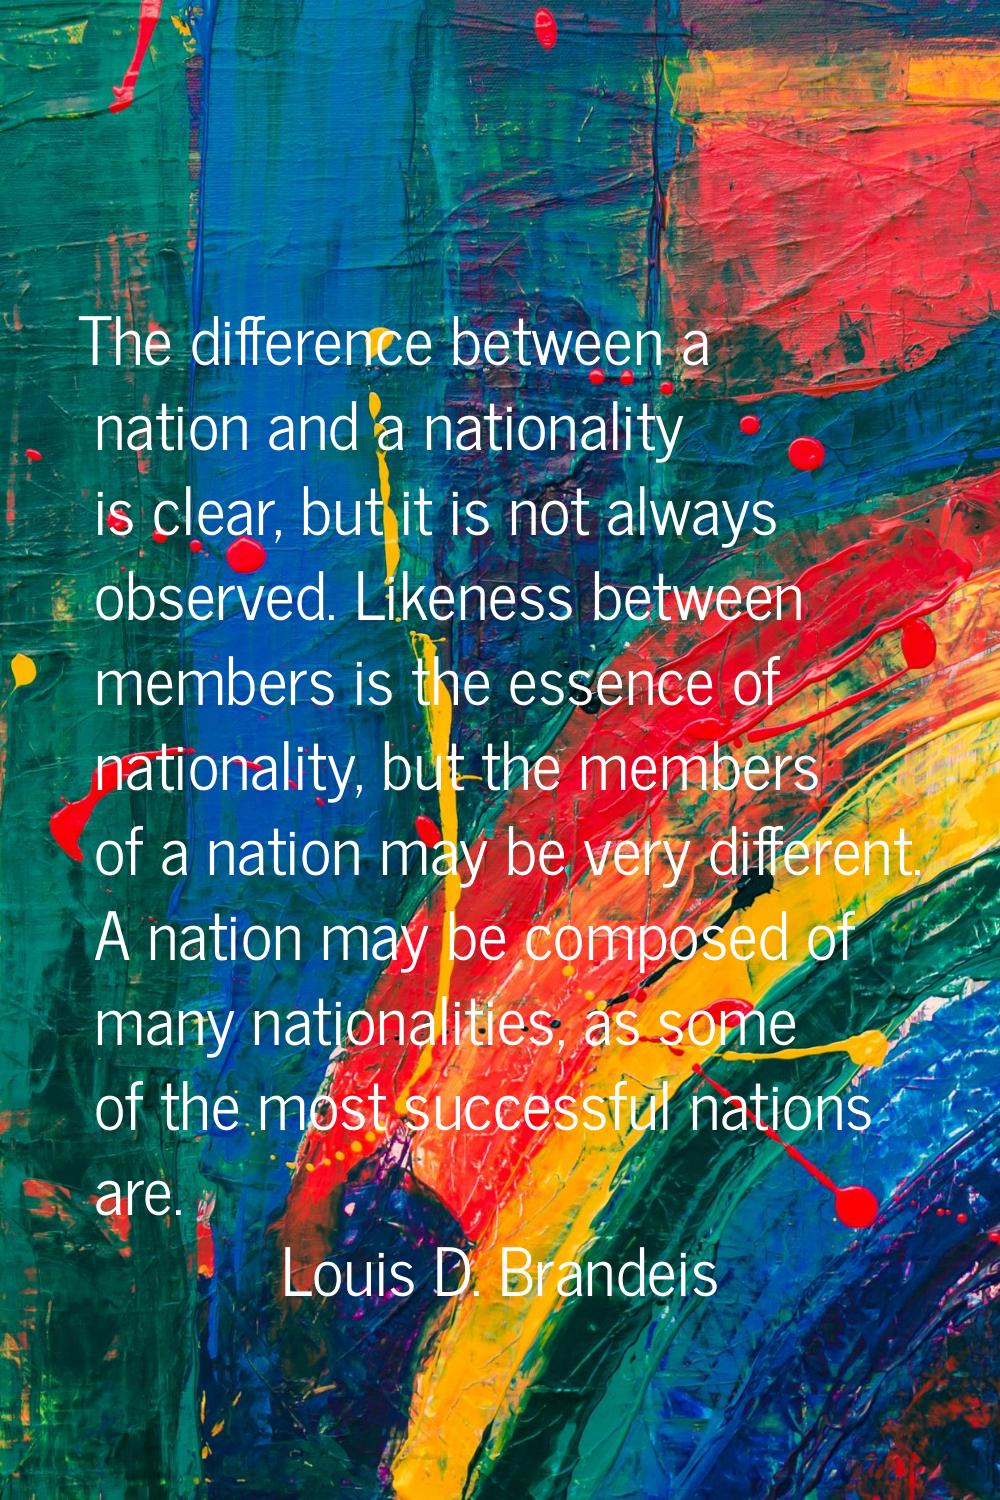 The difference between a nation and a nationality is clear, but it is not always observed. Likeness